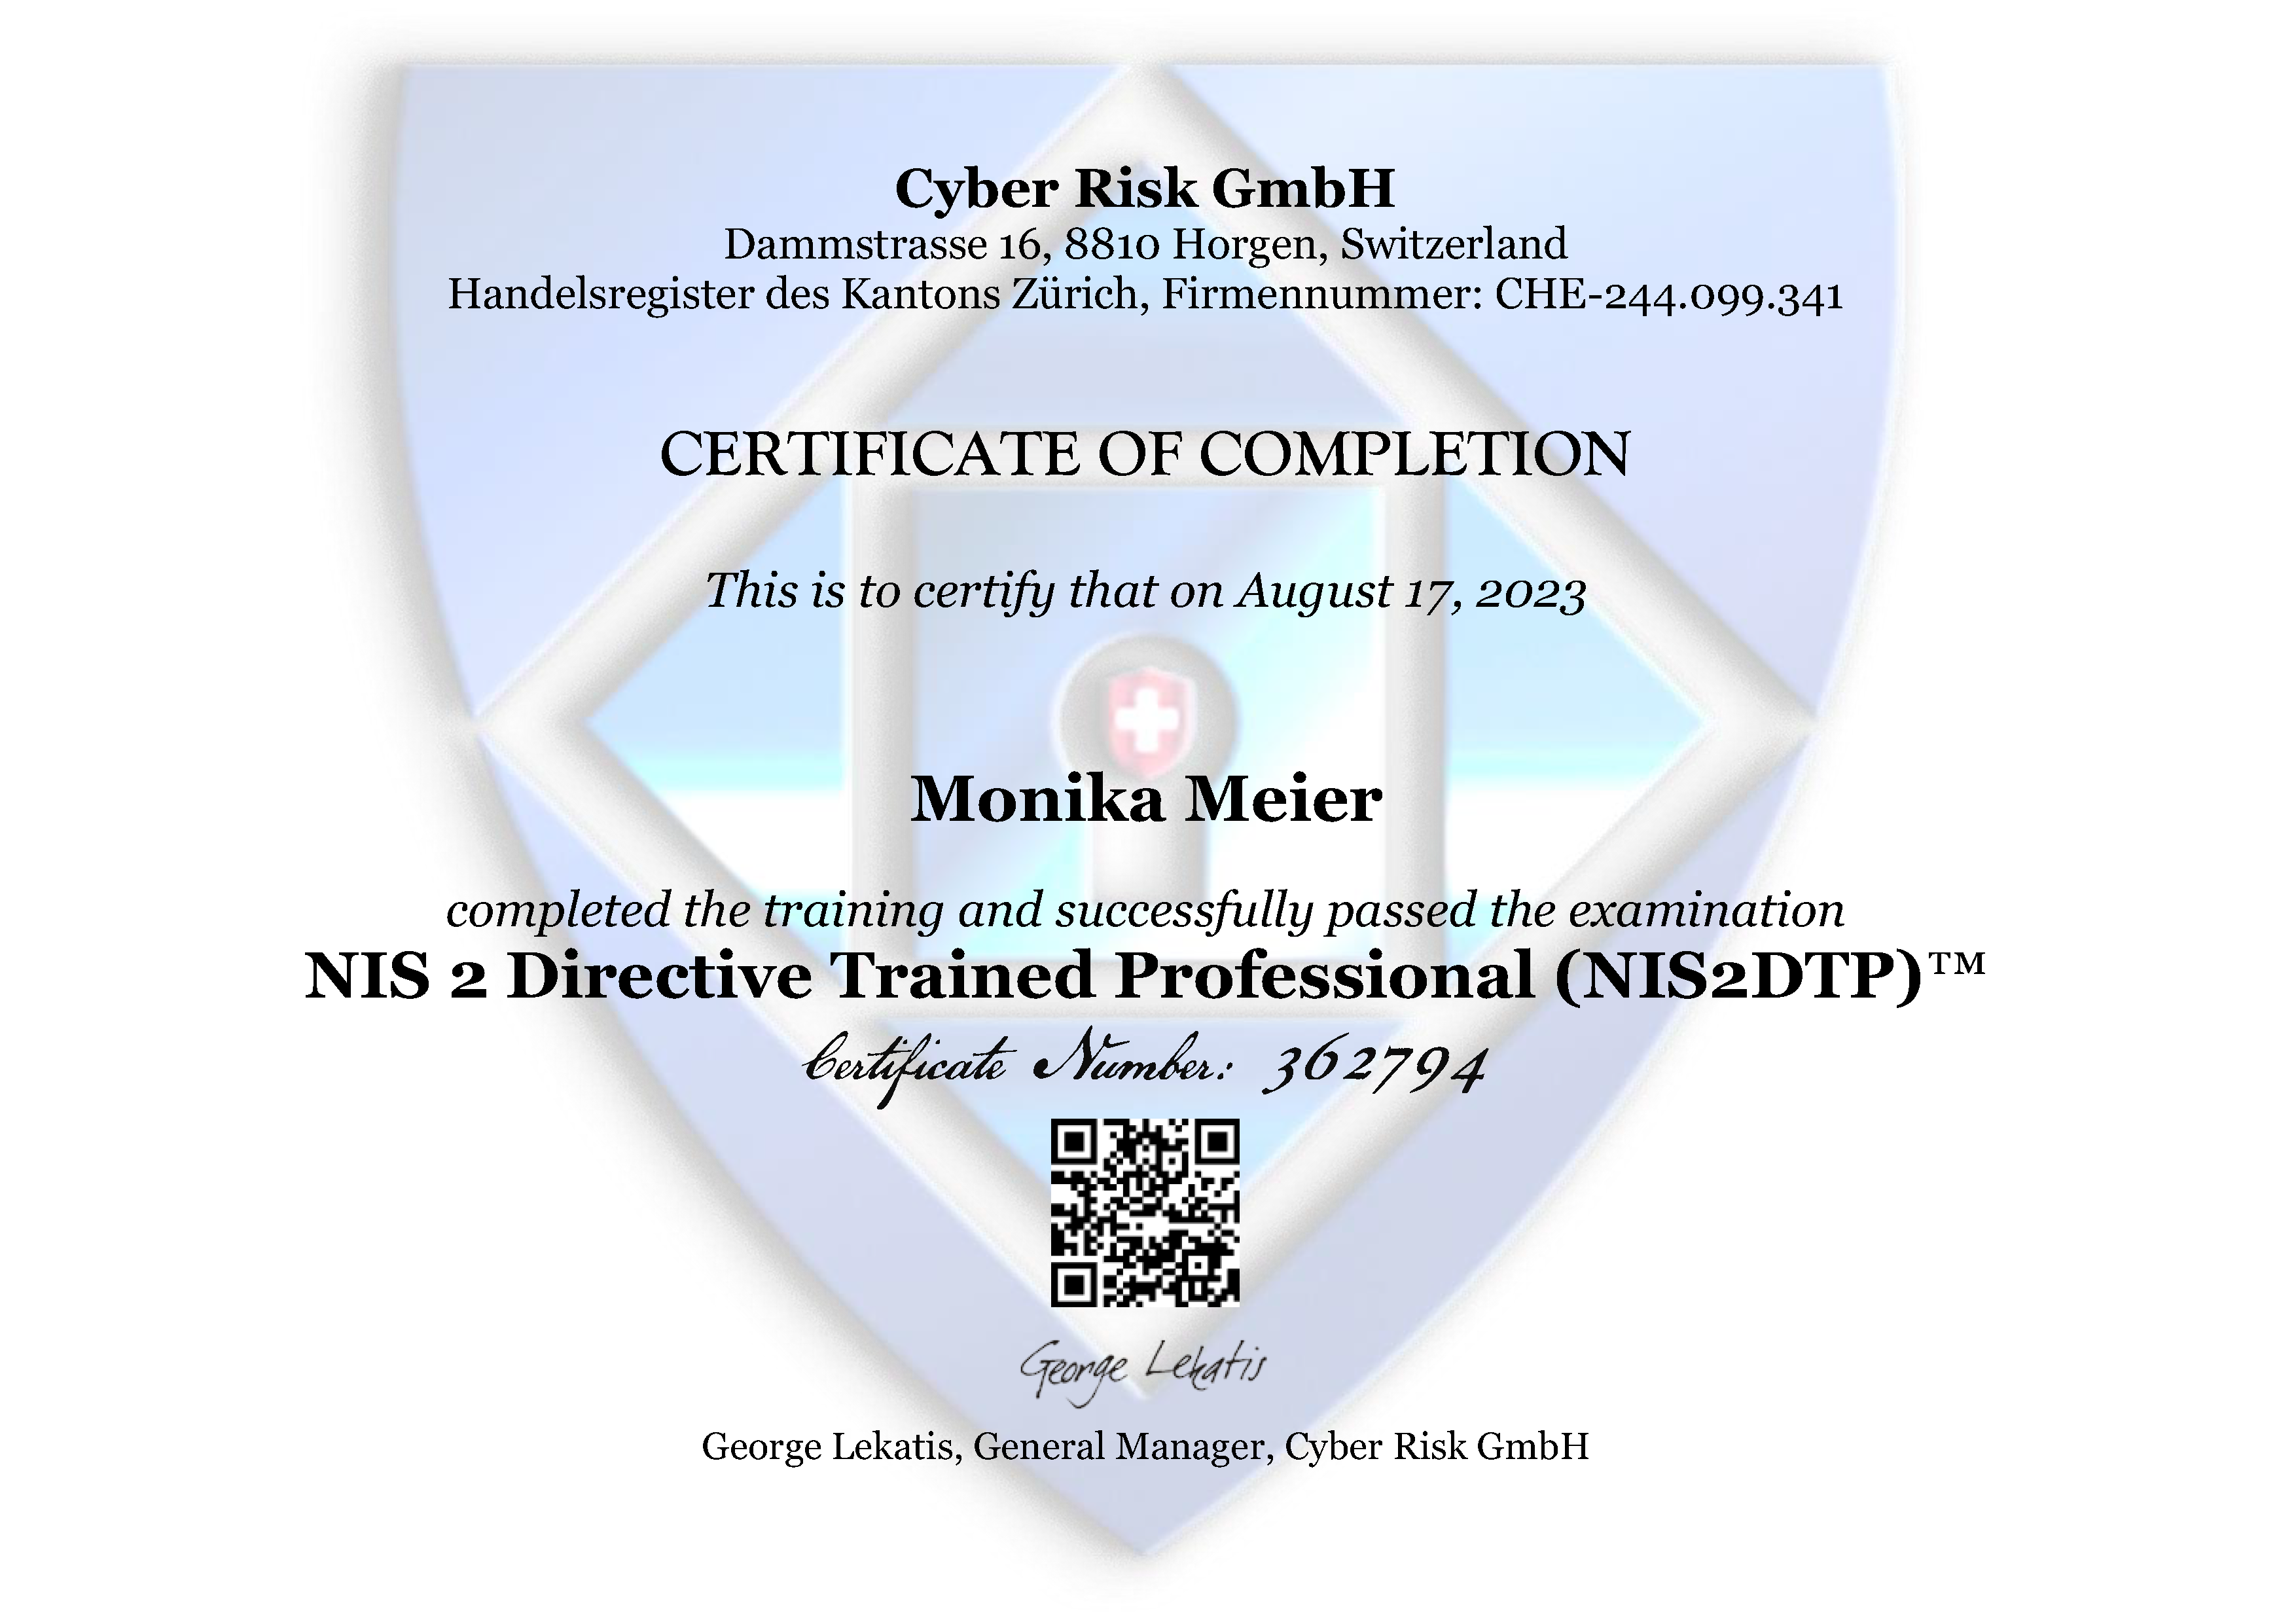 NIS 2 Directive Trained Professional (NIS2DTP)